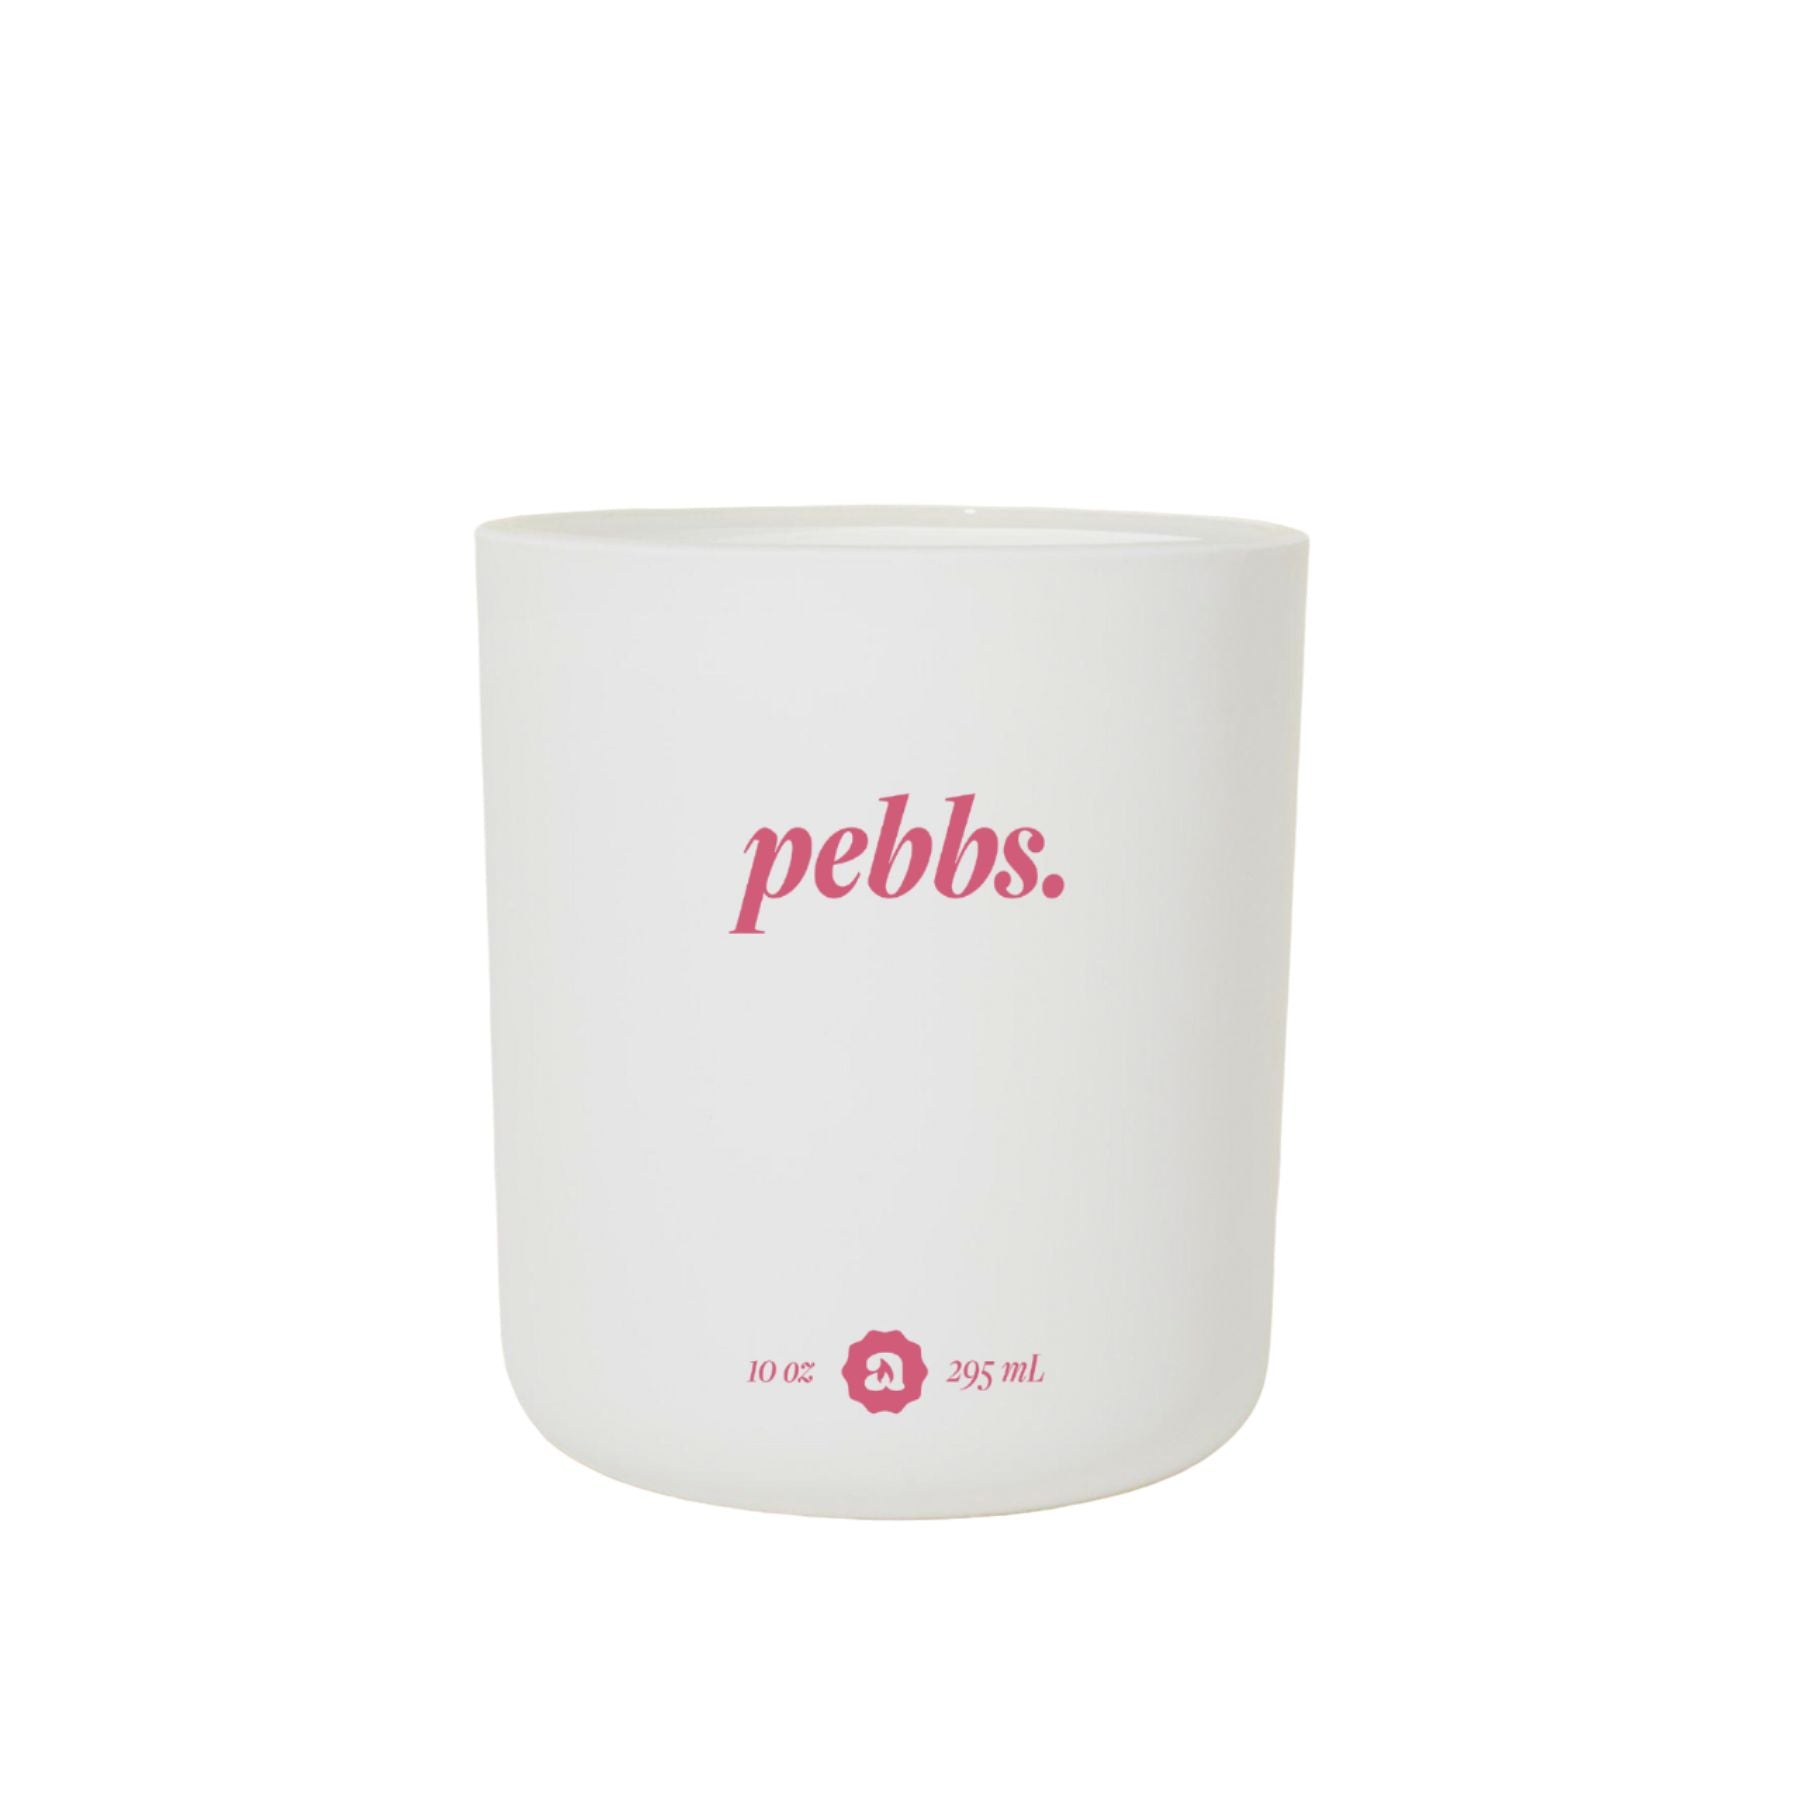 Frooty Pebbs Cereal Jar Candle